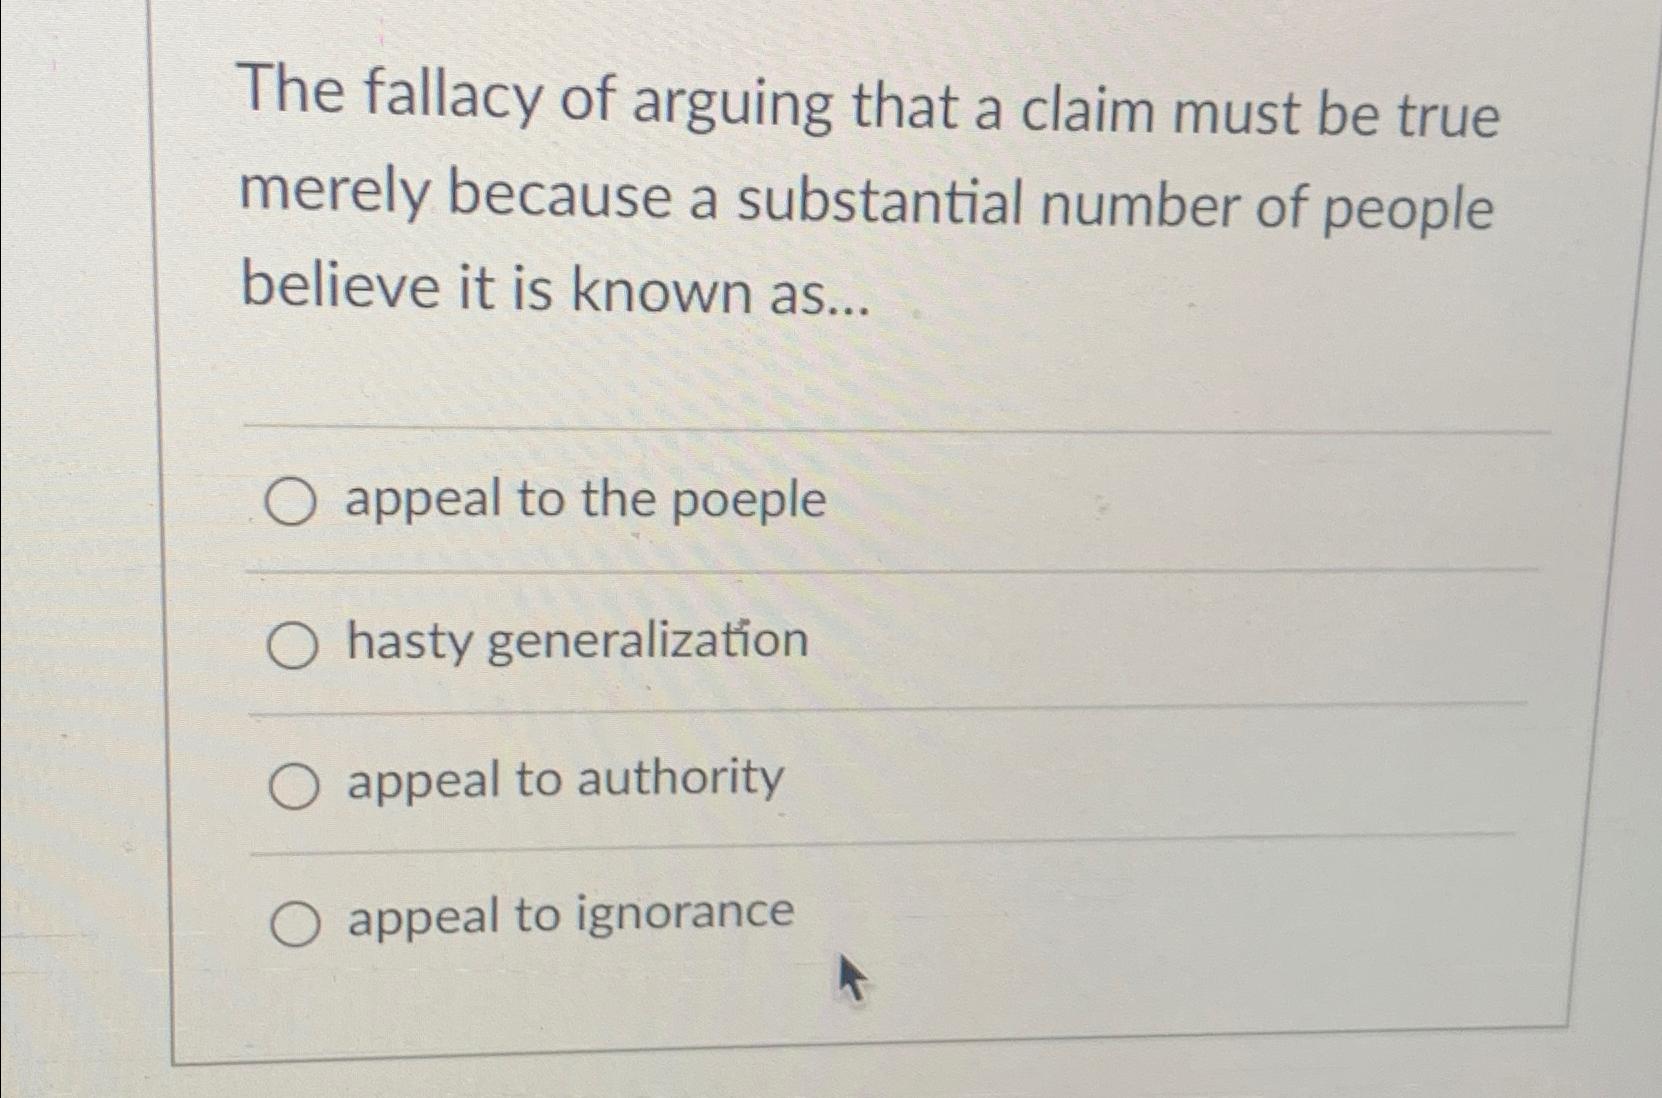 The fallacy of arguing that a claim must be true merely because a substantial number of people believe it is